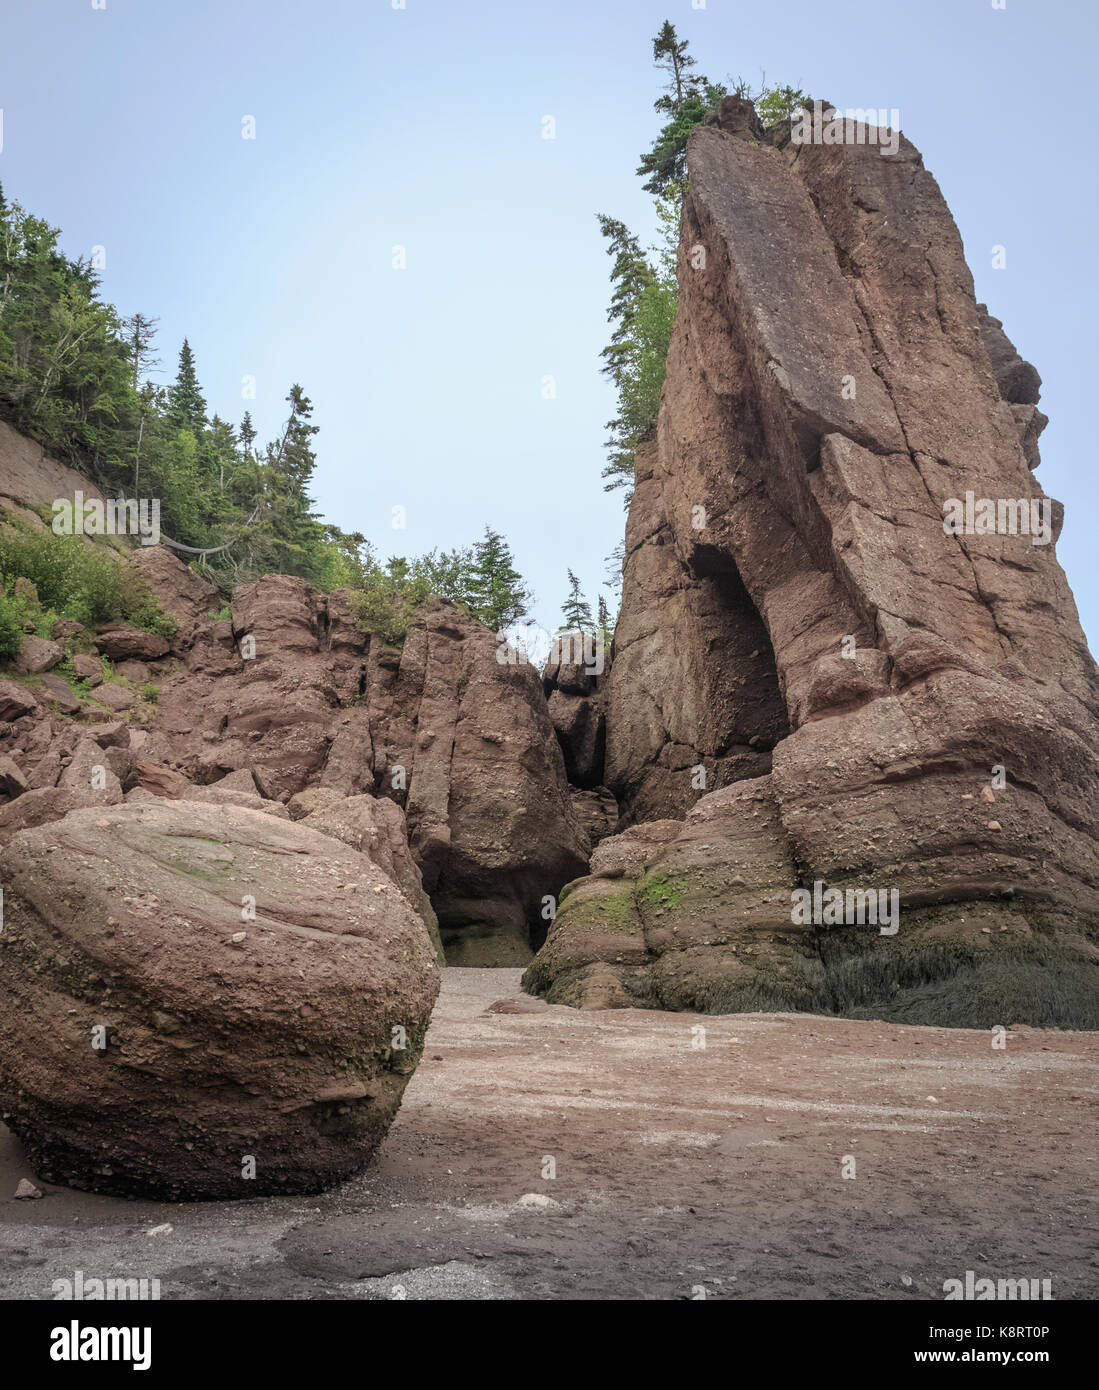 Large boulder fallen from cliff watt at Hopewell Rocks, Fundy National Park, Bay of Fundy, New Brunswick, Canada Stock Photo